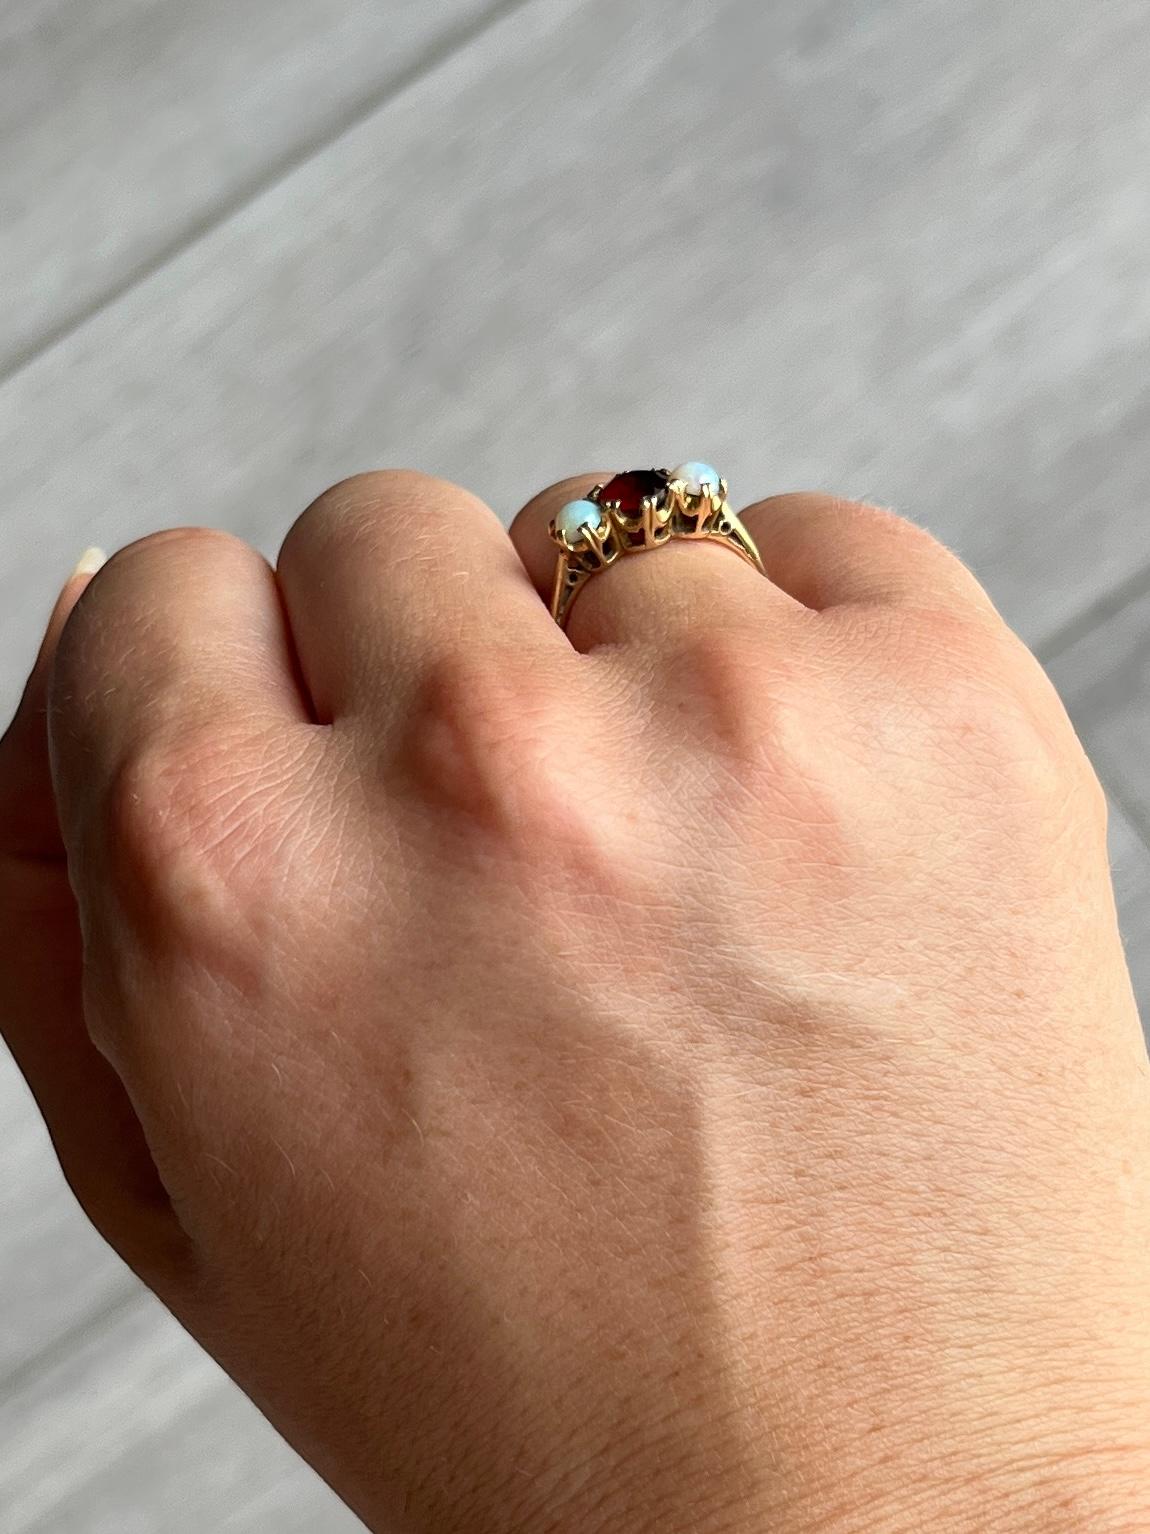 Either side of the deep red garnet are two shimmering opals. The garnet measures 50pts. Modelled in 9 Carat gold. Hallmarked Birmingham 1963.

Ring Size: M 1/2 or 6 1/2 
Height off finger: 5mm

Weight: 2.2g 